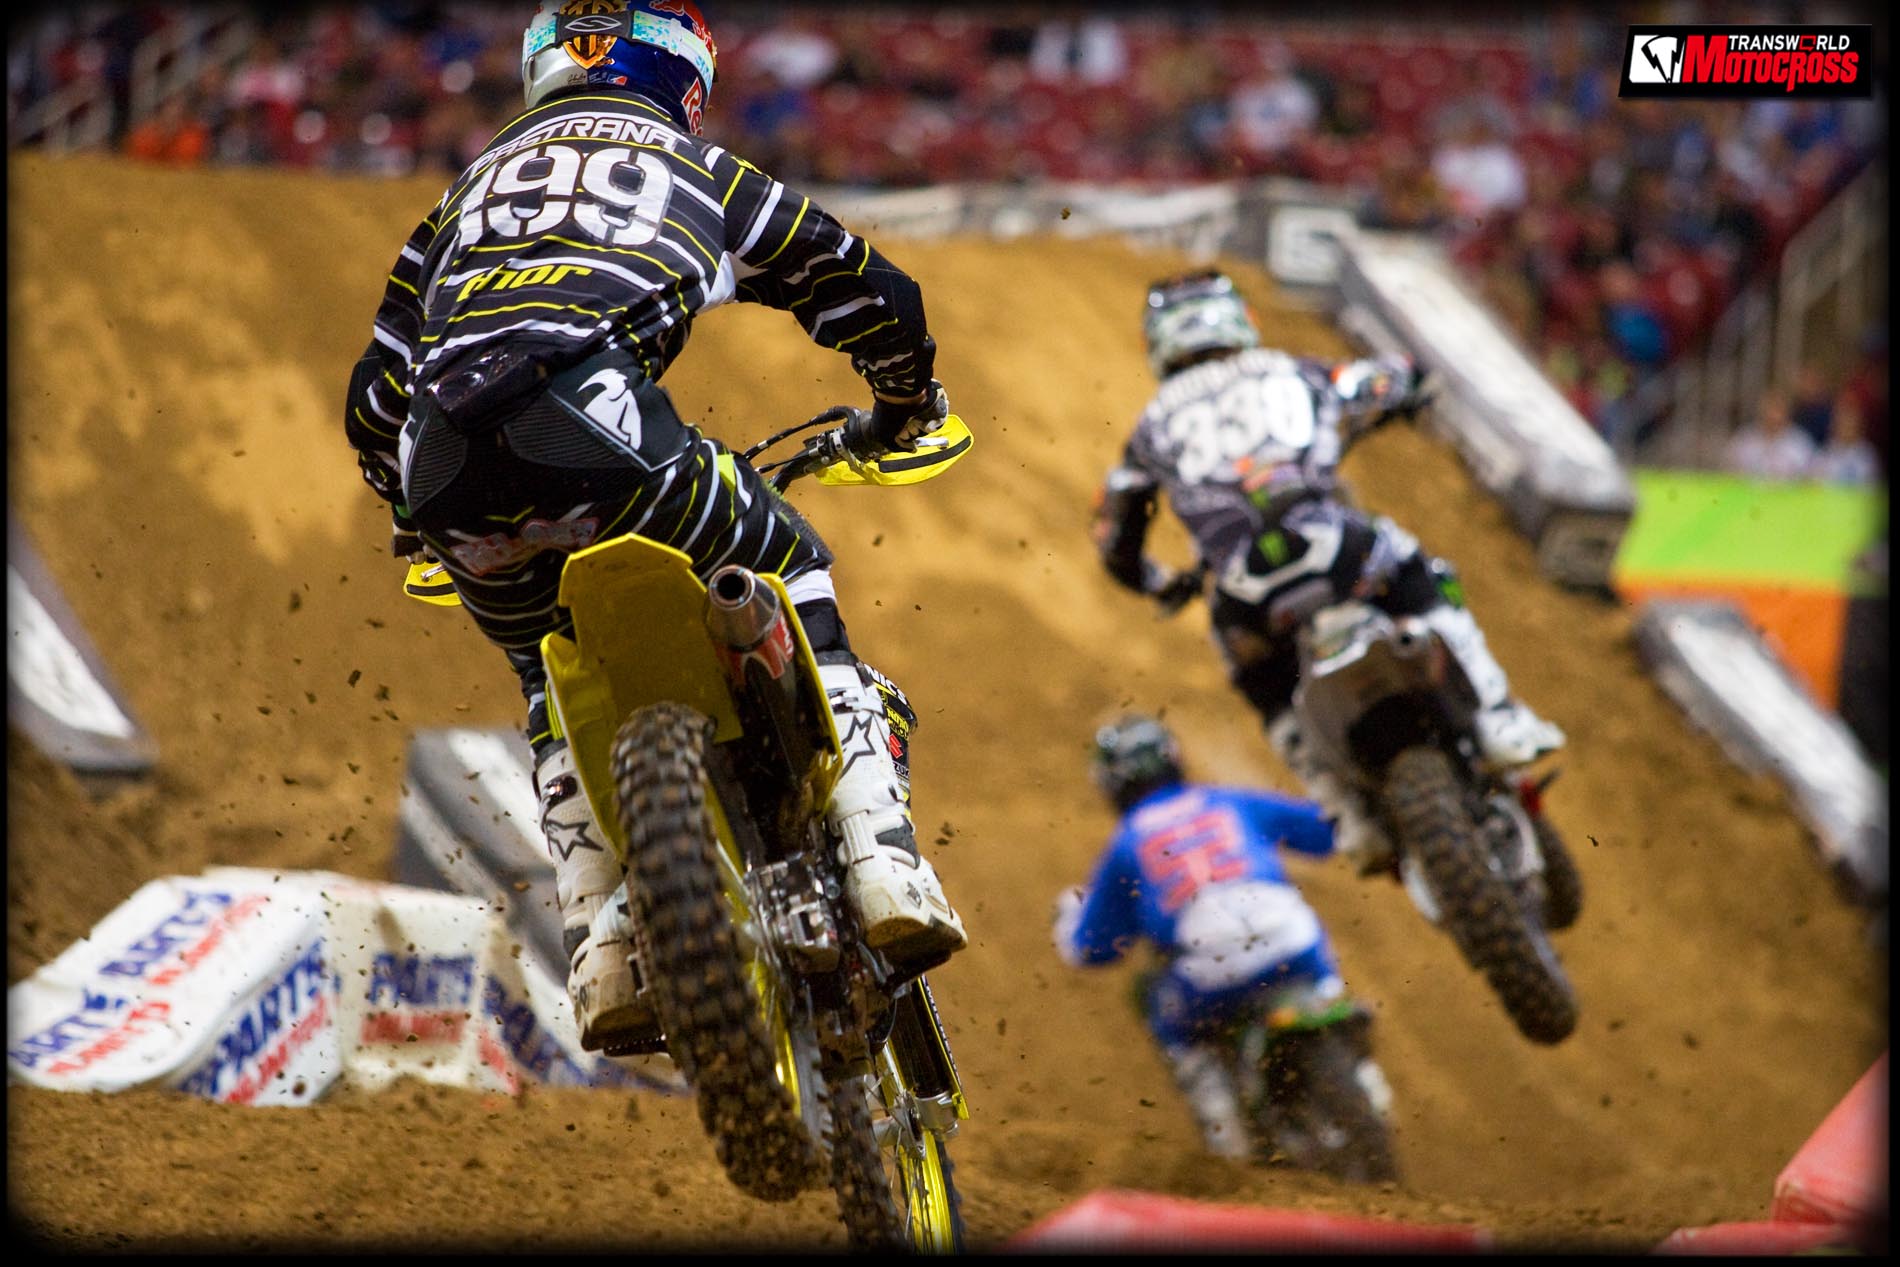 Wednesday Wallpapers: St. Louis | Transworld Motocross